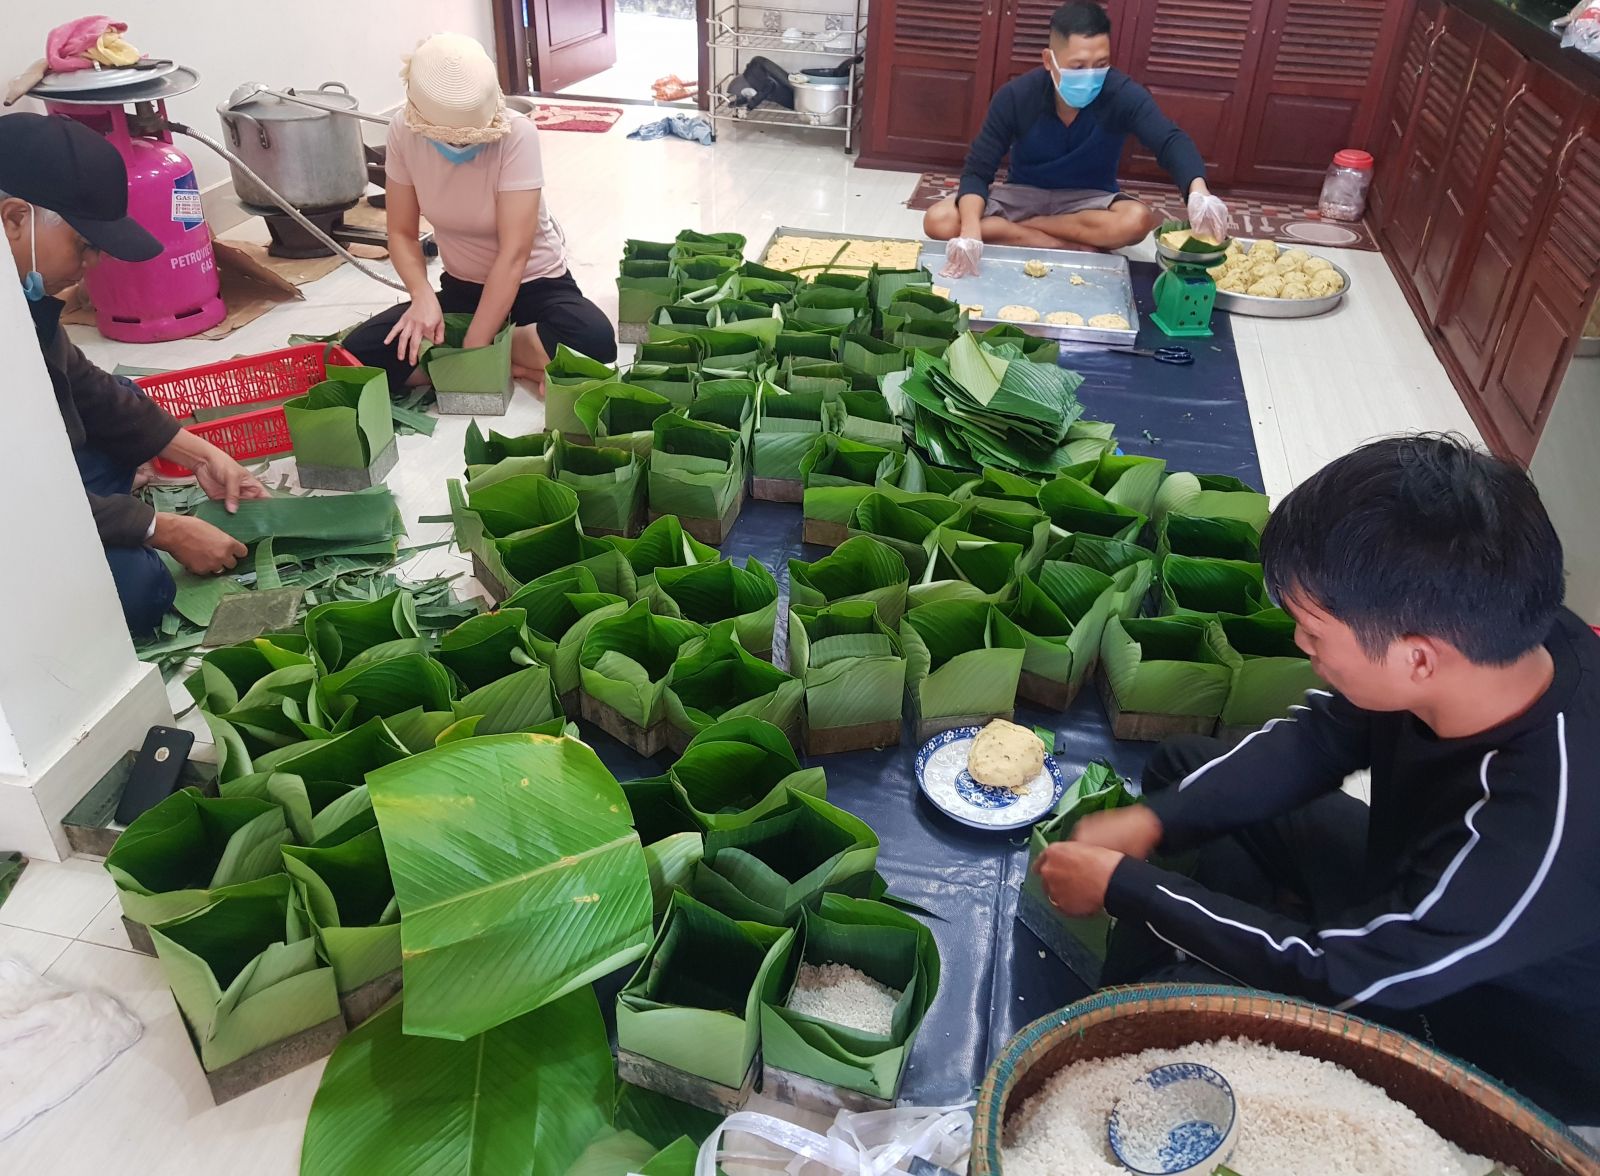 Banh Tet is wrapped by banana leaves, while banh Chung is wrapped from Dong leaves in a ready-made mold